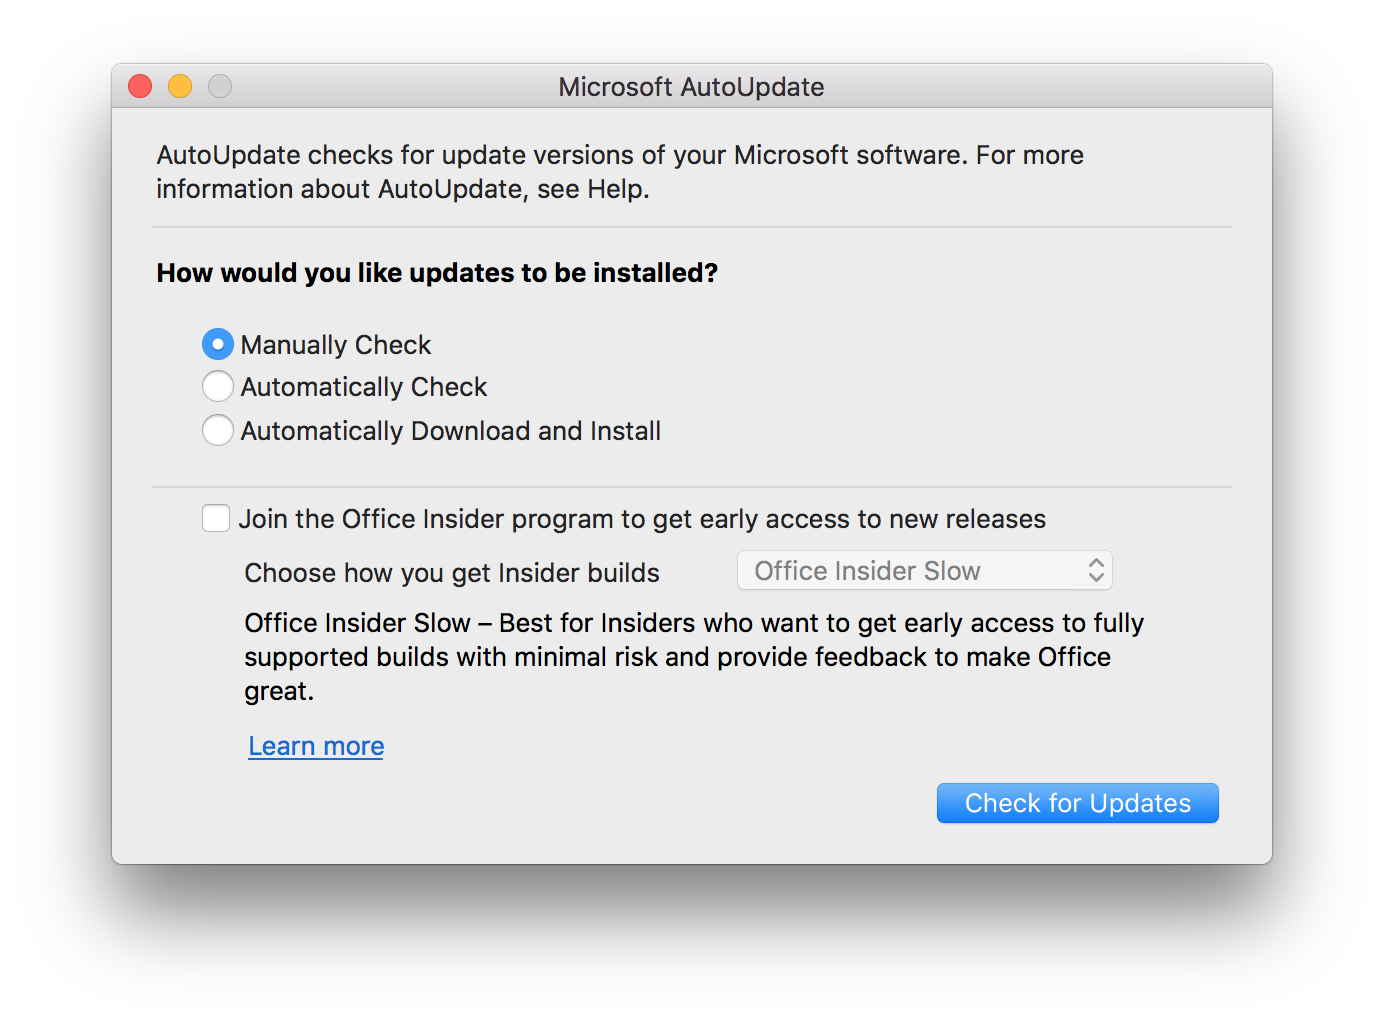 why does microsoft want to me upgrade office 2016 for mac